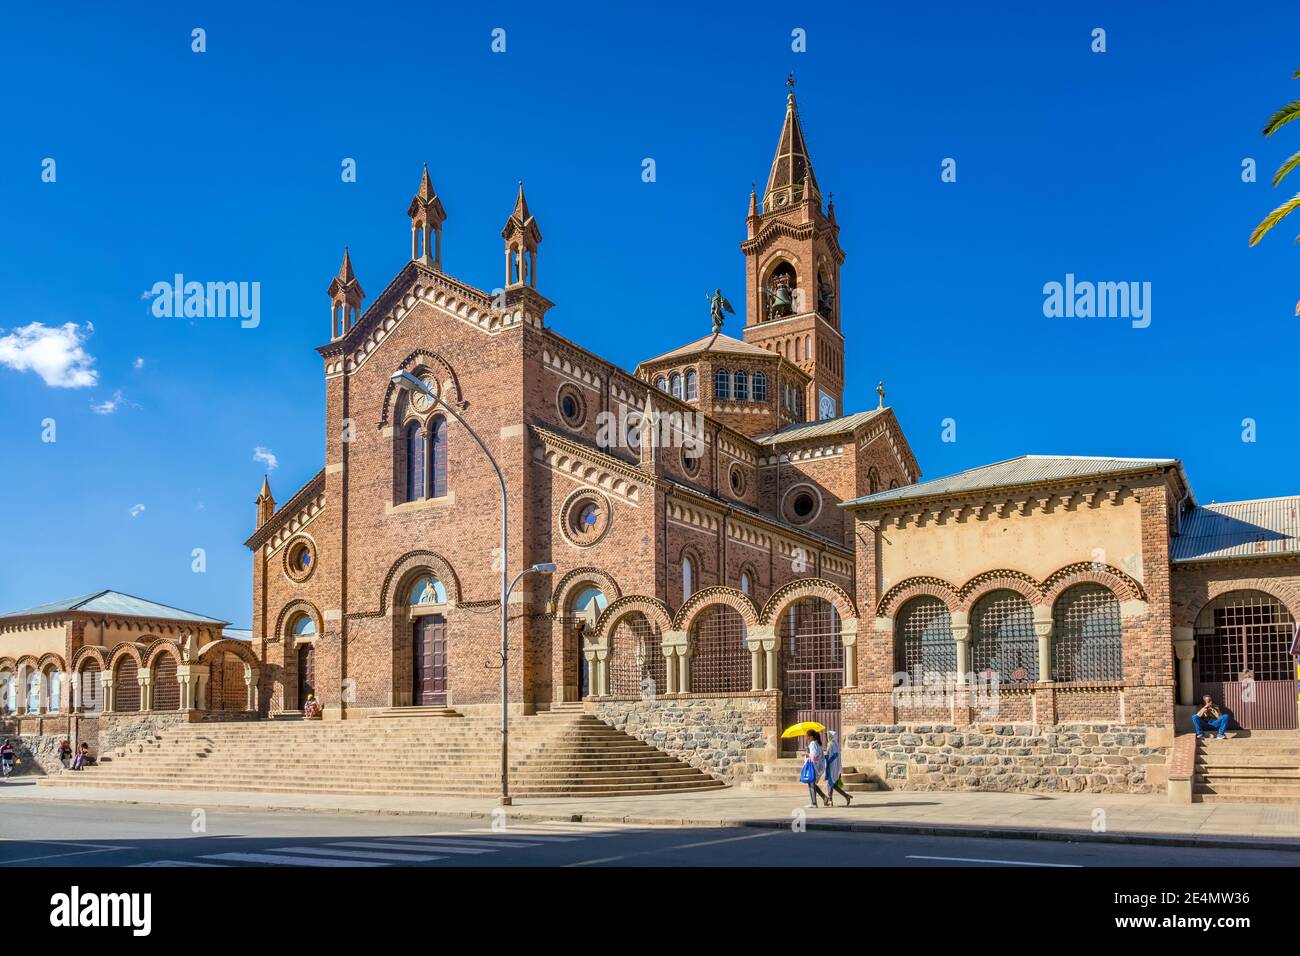 Church of Our Lady of the Rosary in central Asmara, the capital of Eritrea, East Africa. Stock Photo